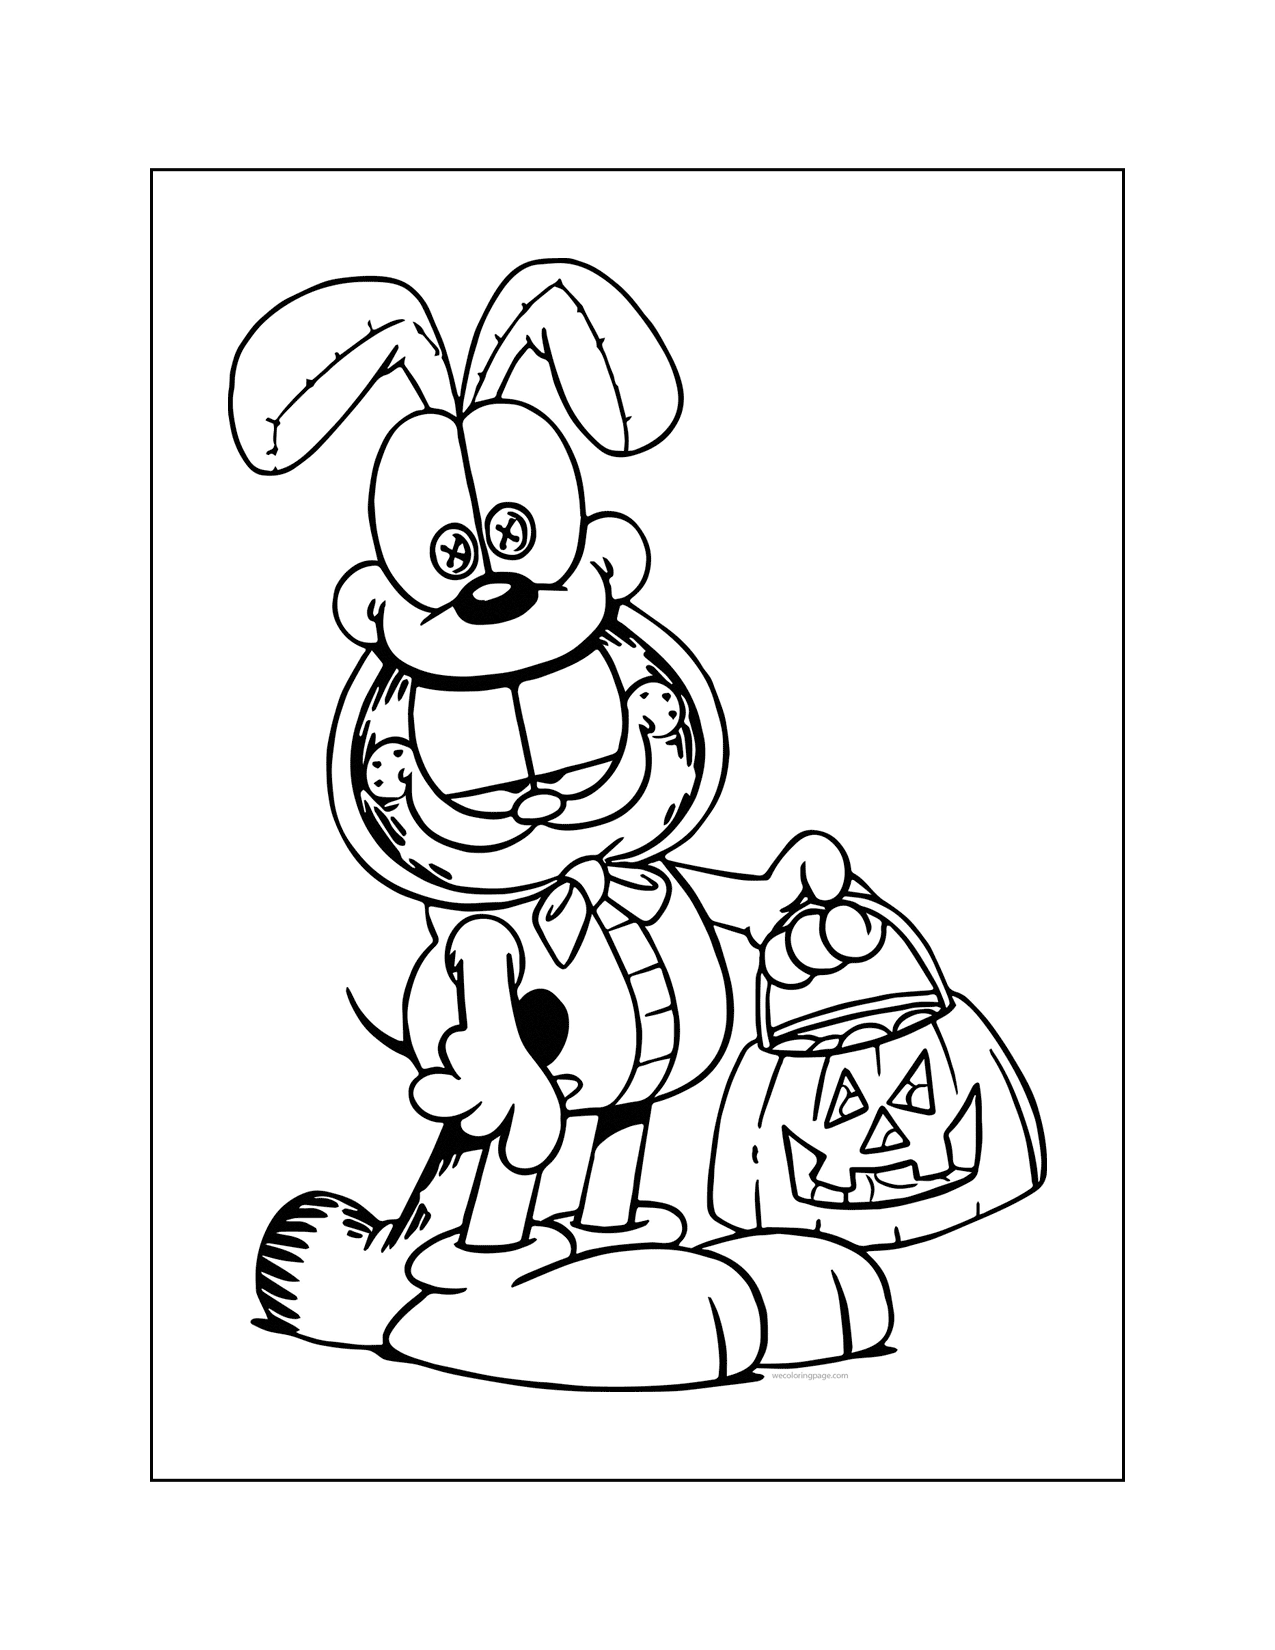 Garfield In Odie Costume Coloring Page